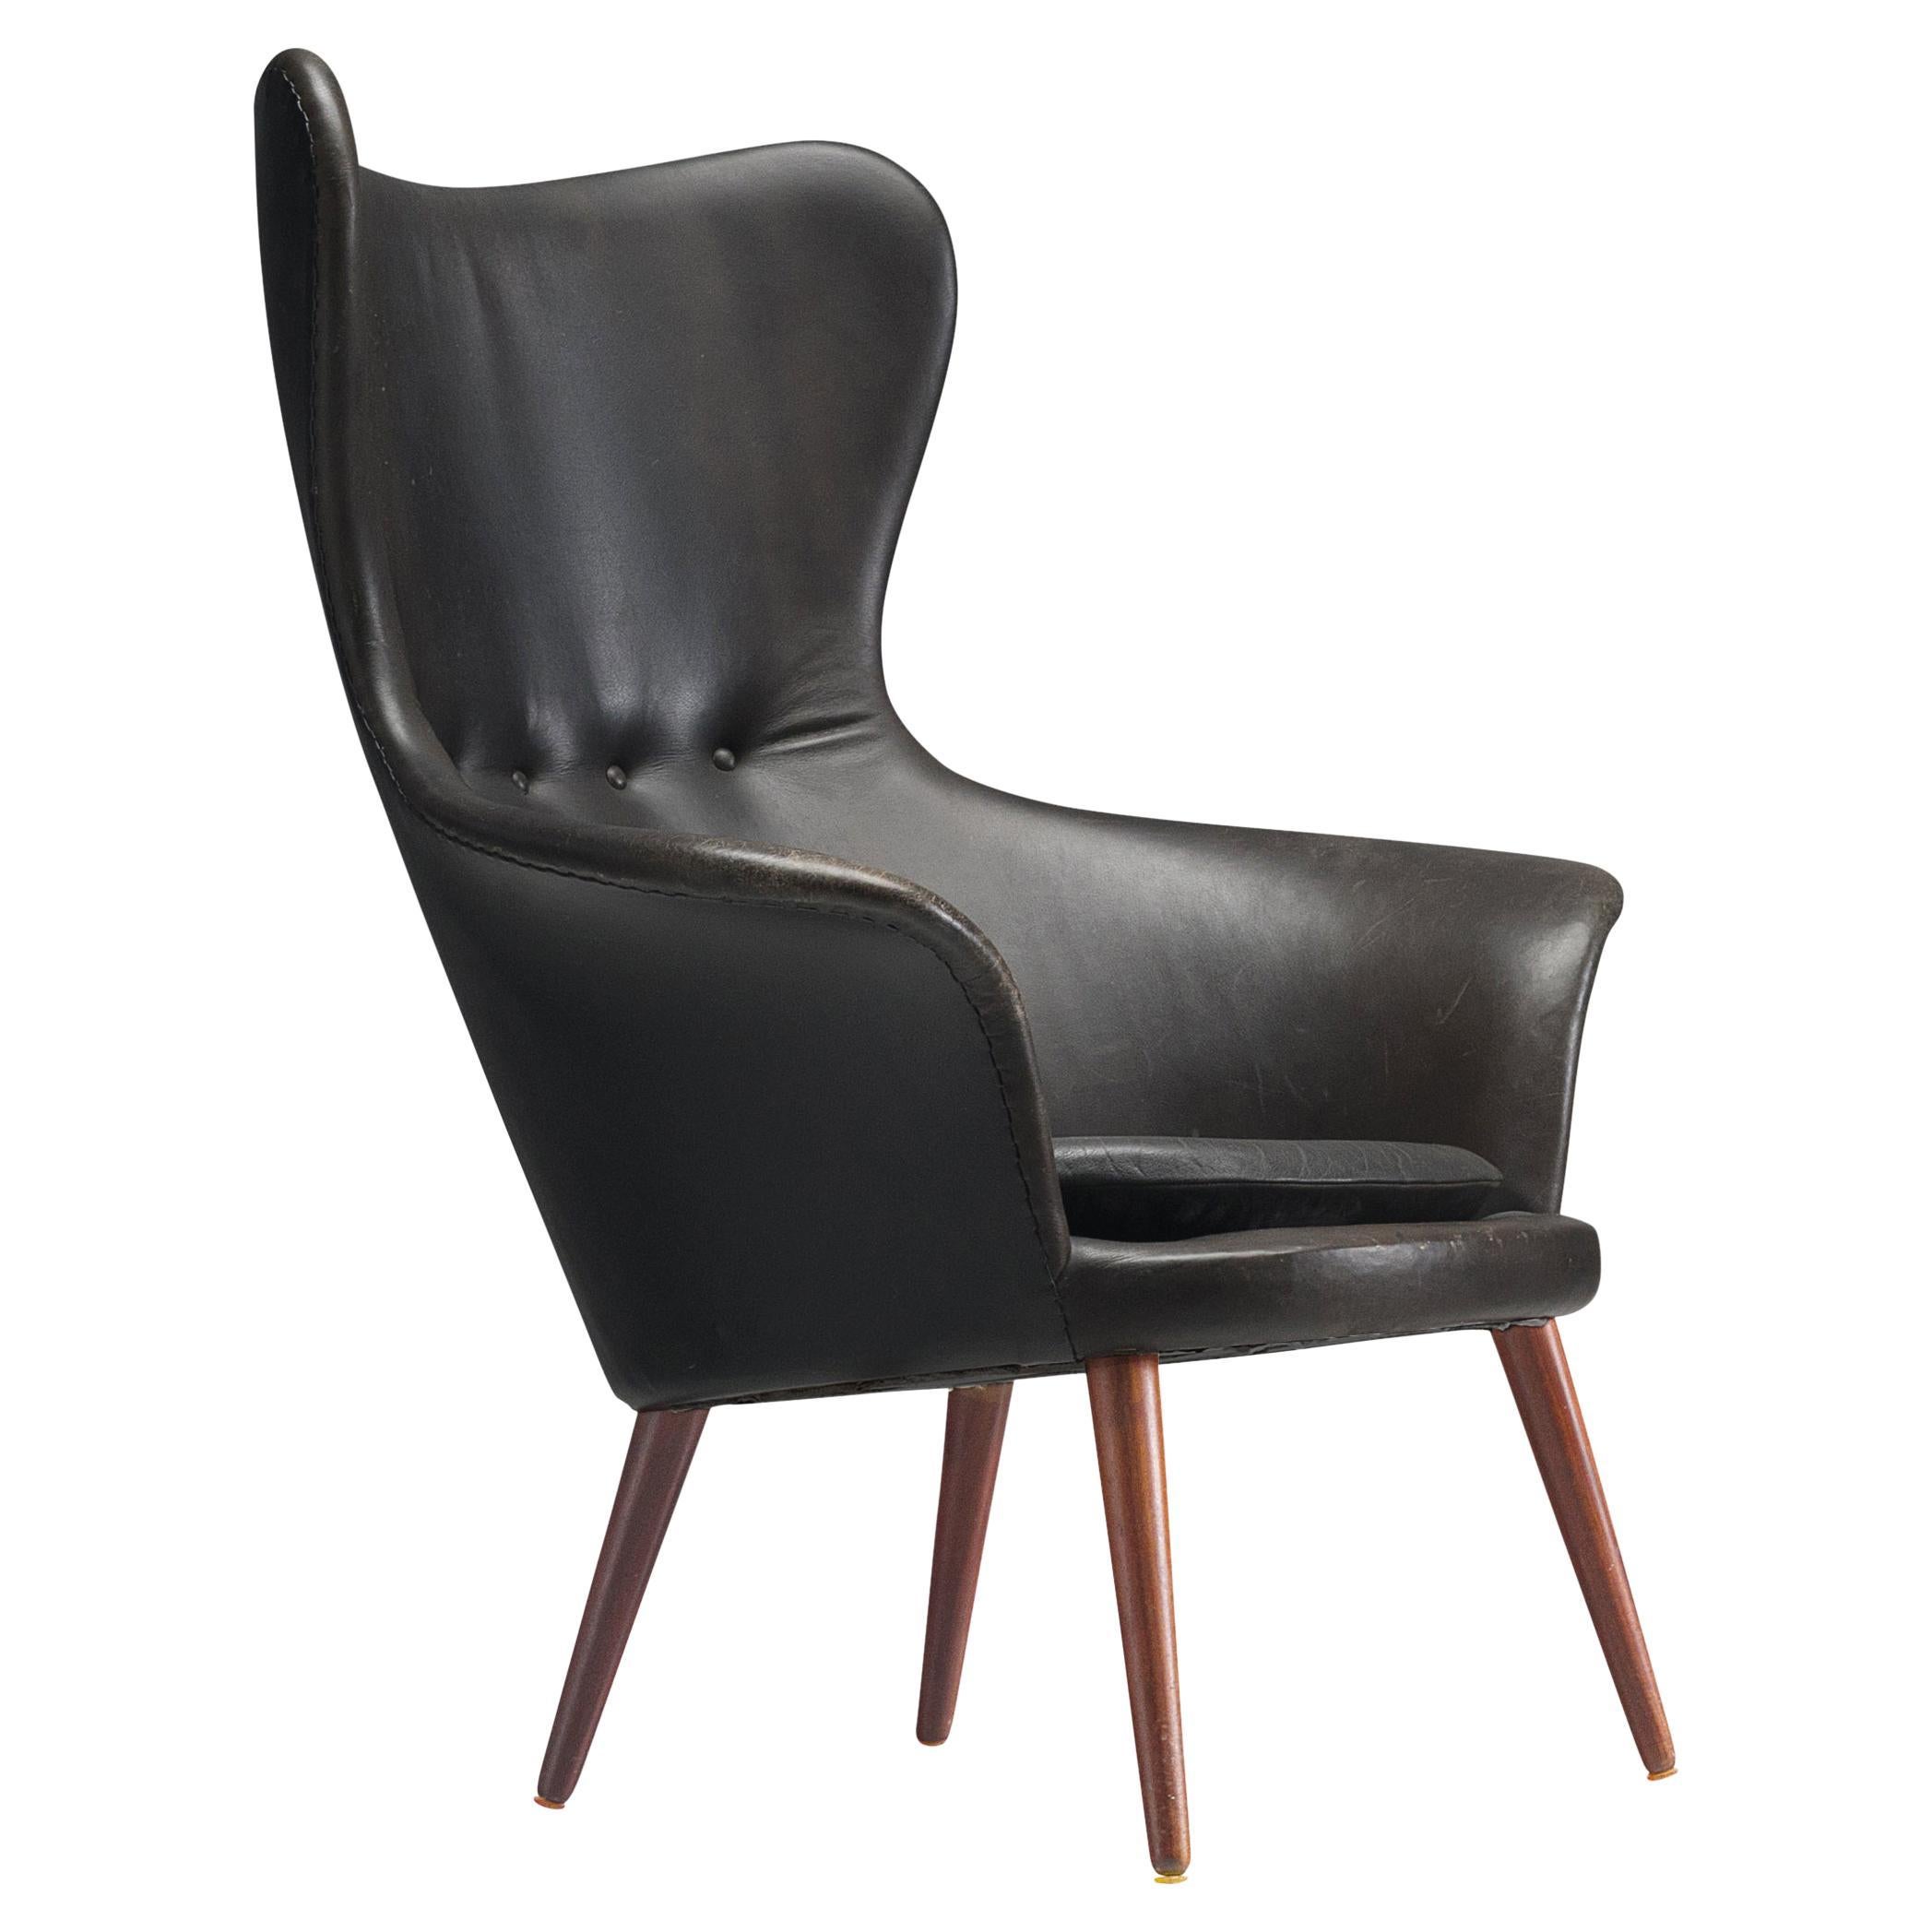 High Wingback Chair In Black Leather, Black Leather Wingback Chair Modern Design